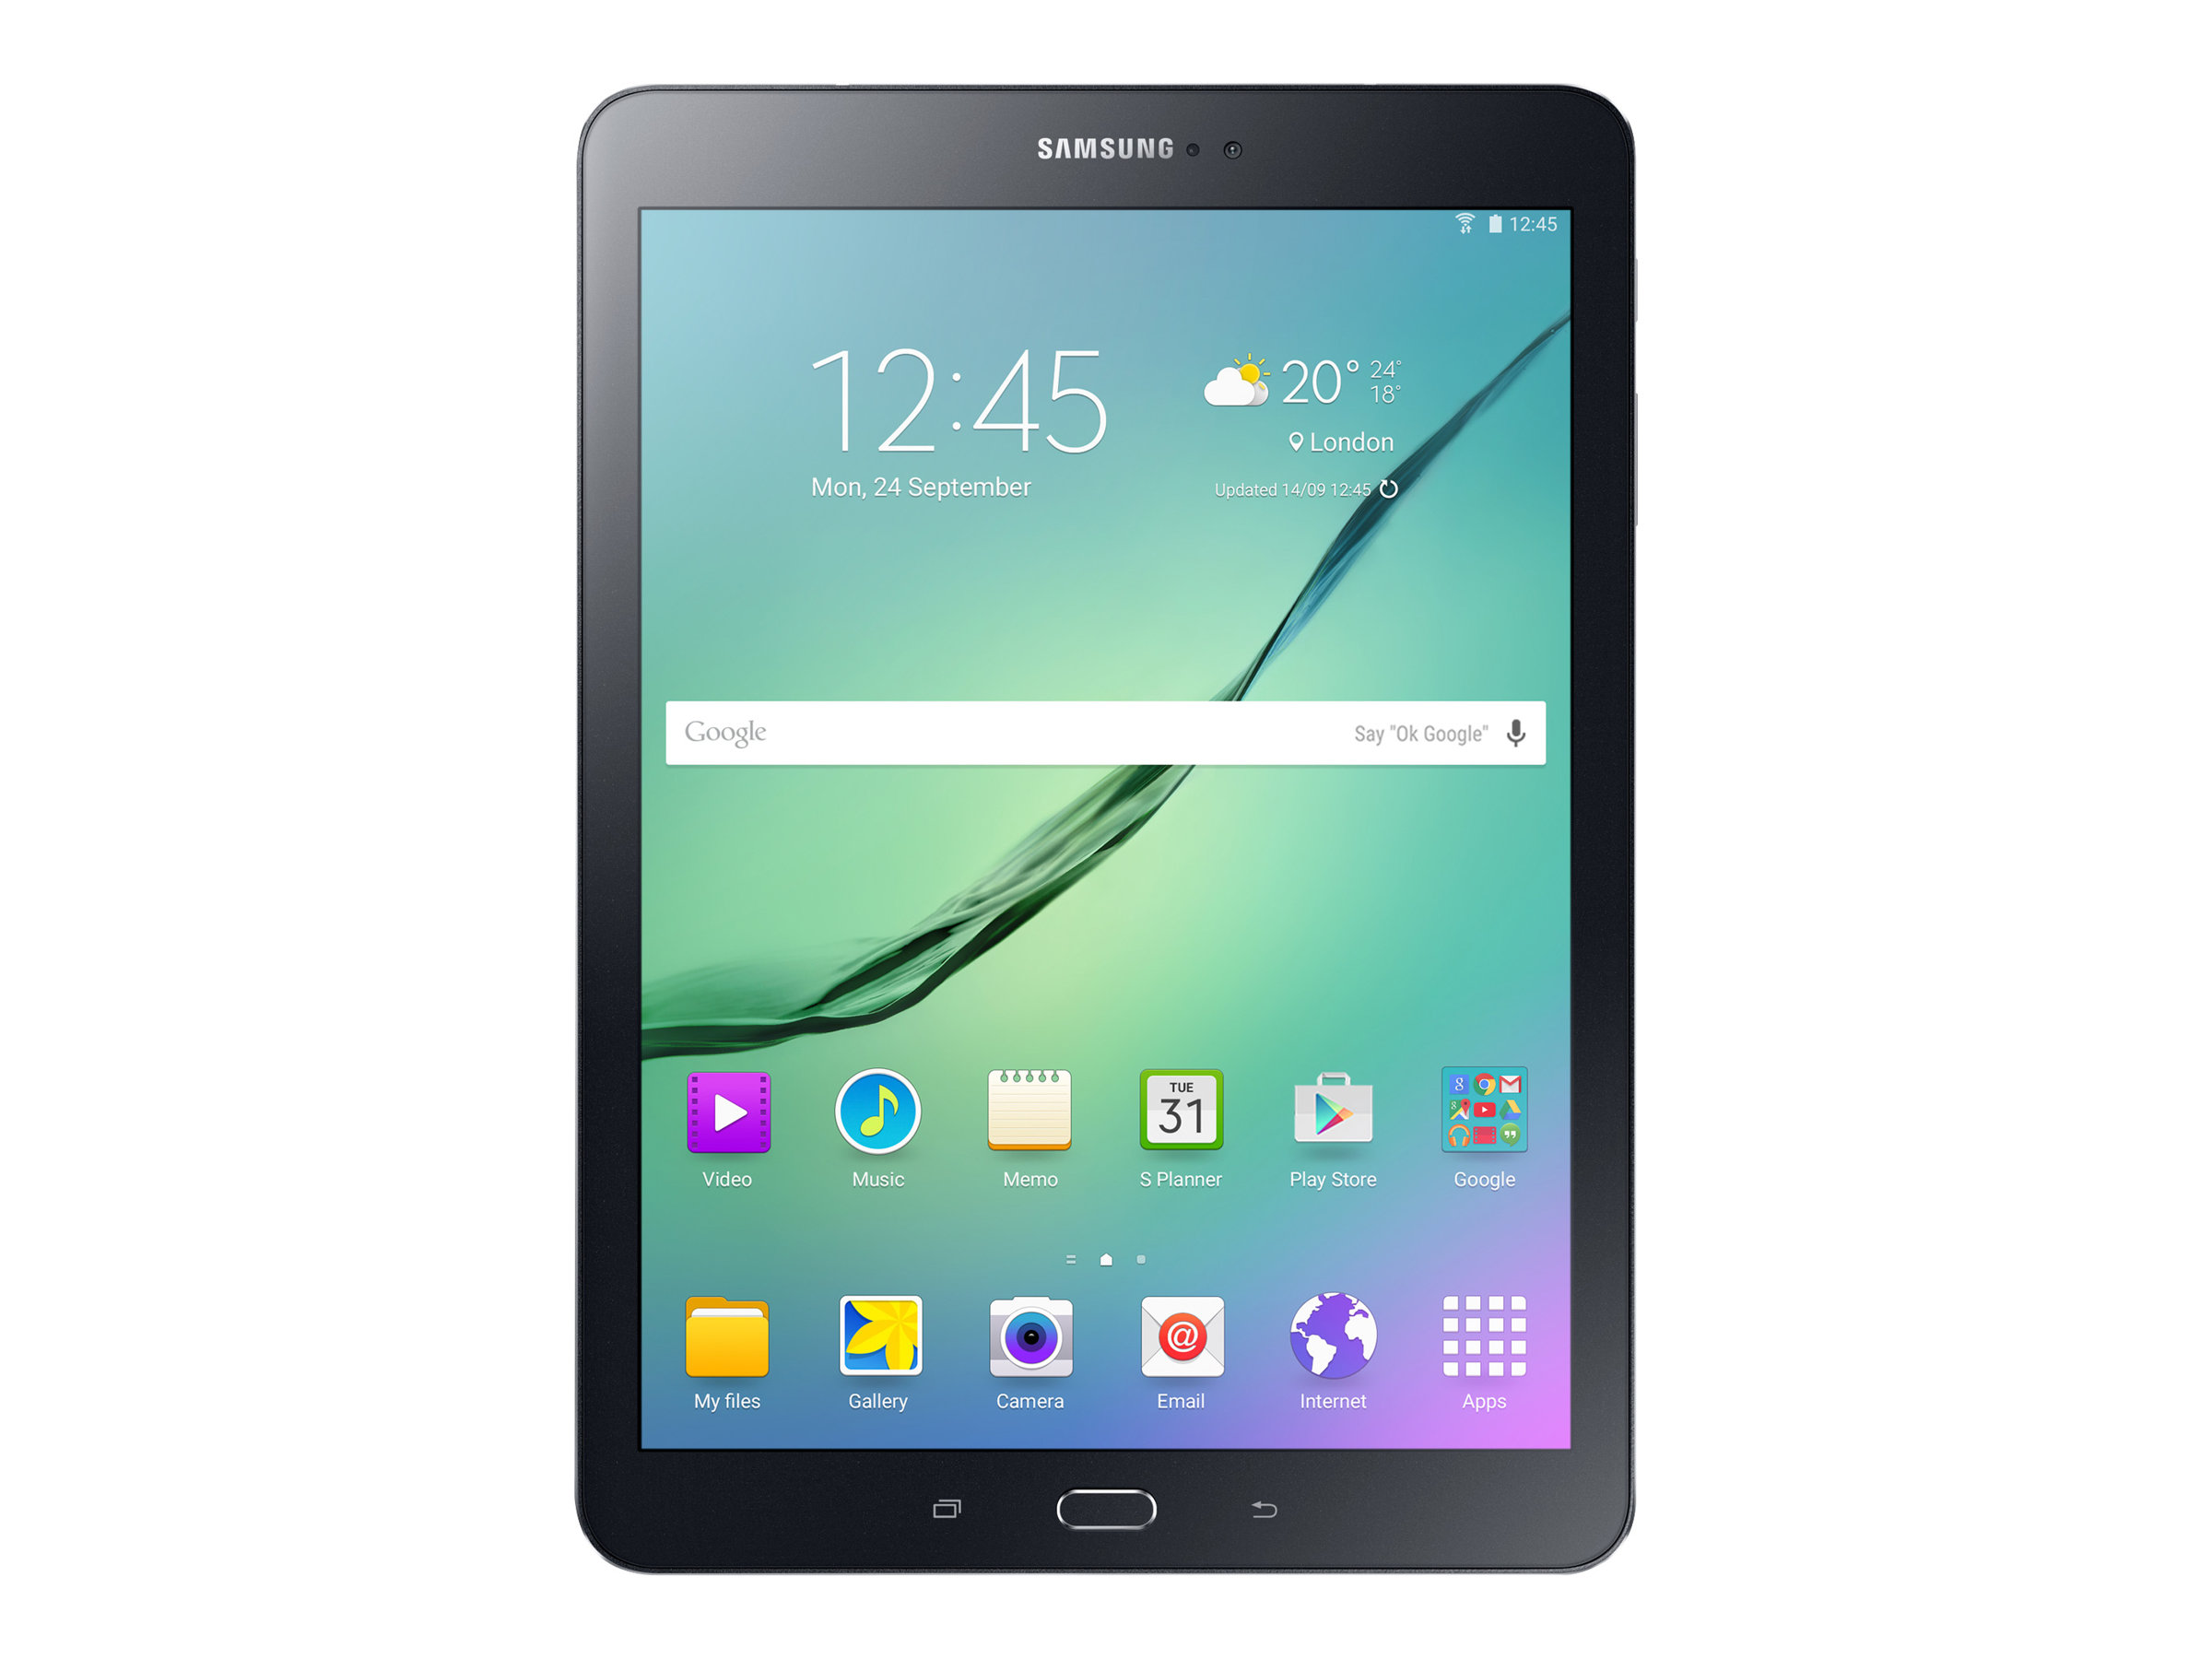 SAMSUNG Galaxy Tab S2 9.7" 64GB Android 6.0 WiFi Tablet Black - Micro SD Card slot - SM-T813NZKFXAR - image 1 of 12